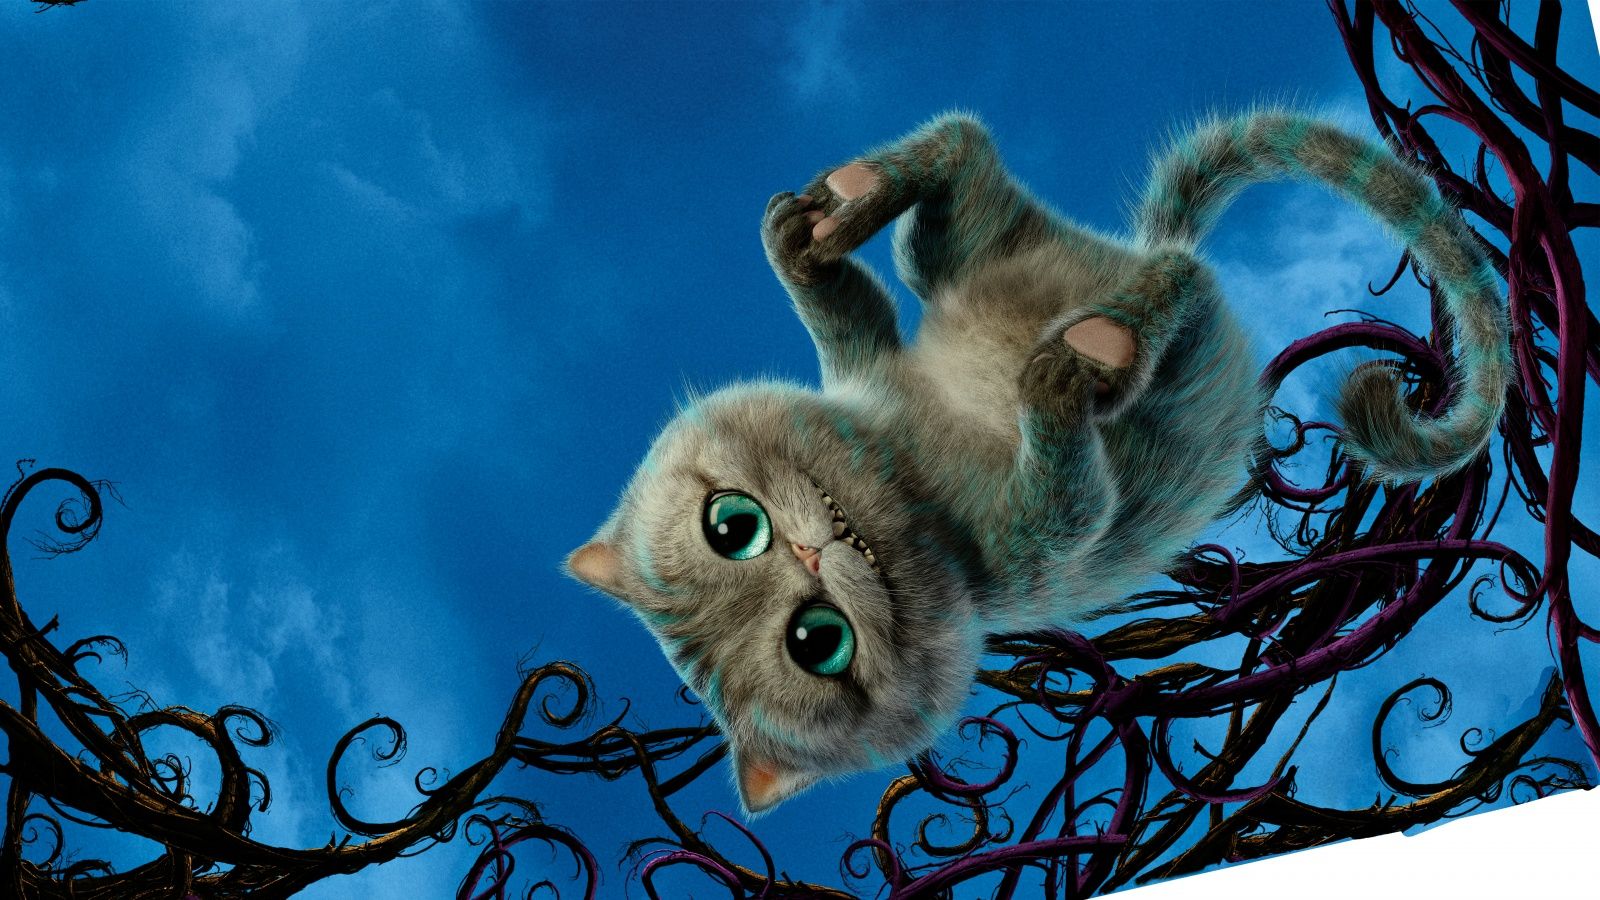 Cheshire Cat Aliceking Glass Wallpaper in jpg format for free download